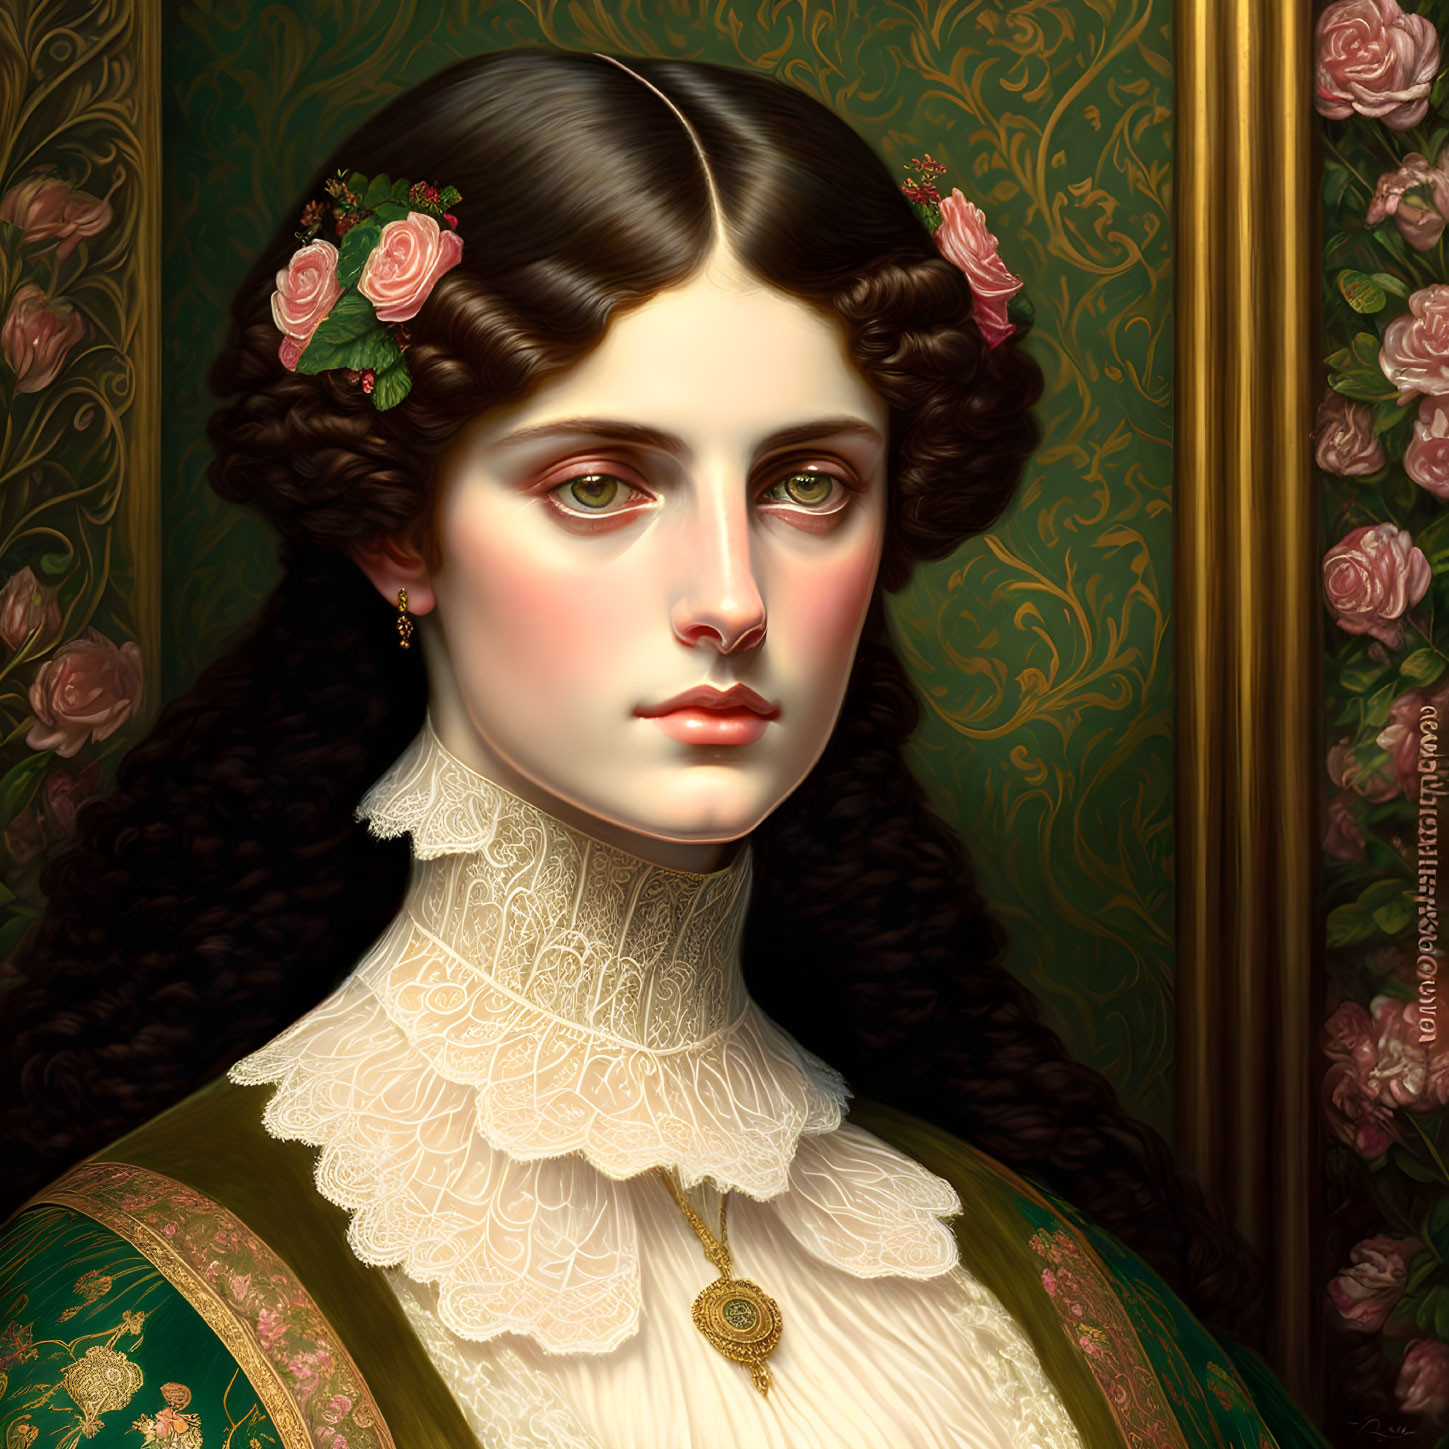 Victorian-era woman digital artwork with lace collar and floral background